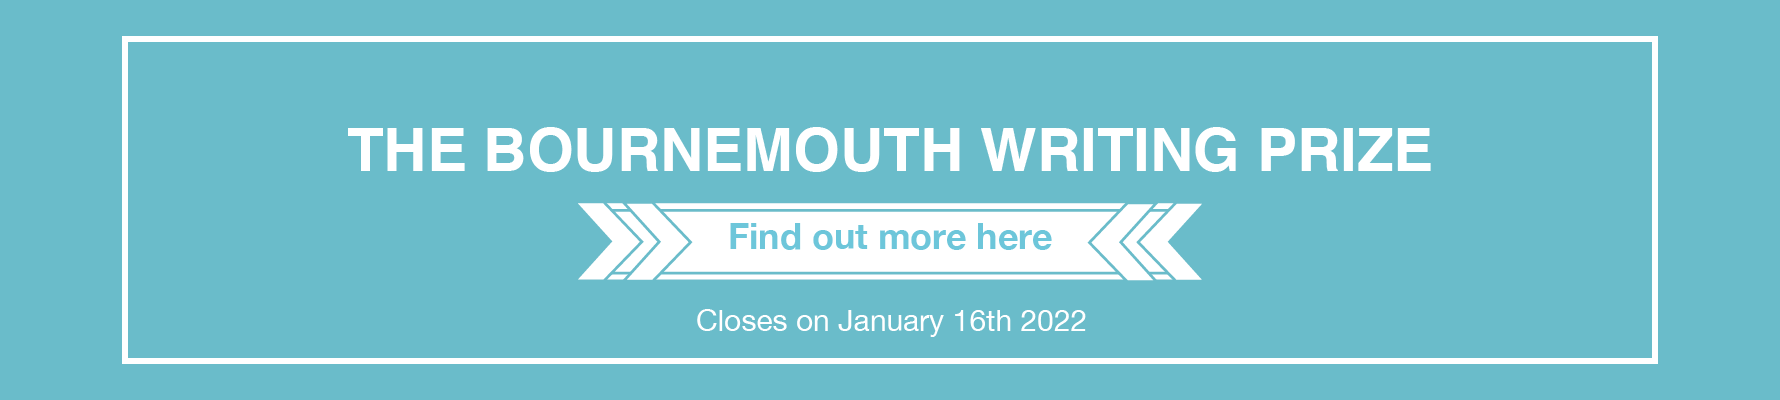 The Bournemouth Writing Prize banner